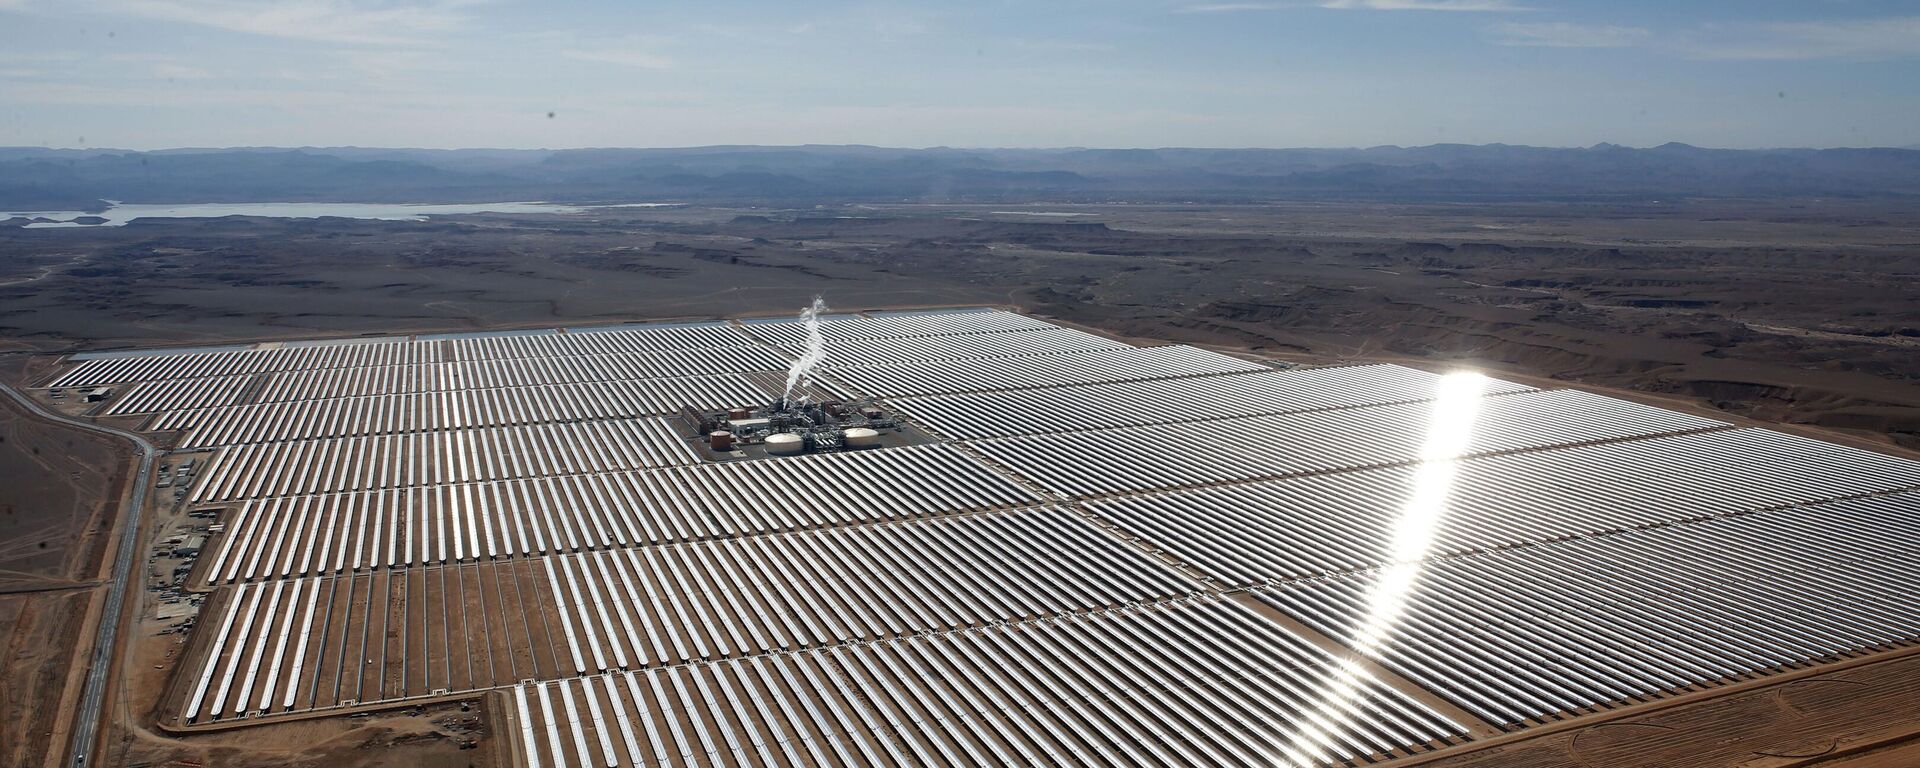  An aerial view of a solar power plant in Ouarzazate, central Morocco on Feb.4, 2016. Renewable energy's potential across the African continent remains largely untapped, according to a new report in April 2022 by the United Nation's Intergovernmental Panel on Climate Change.  - Sputnik India, 1920, 28.07.2023